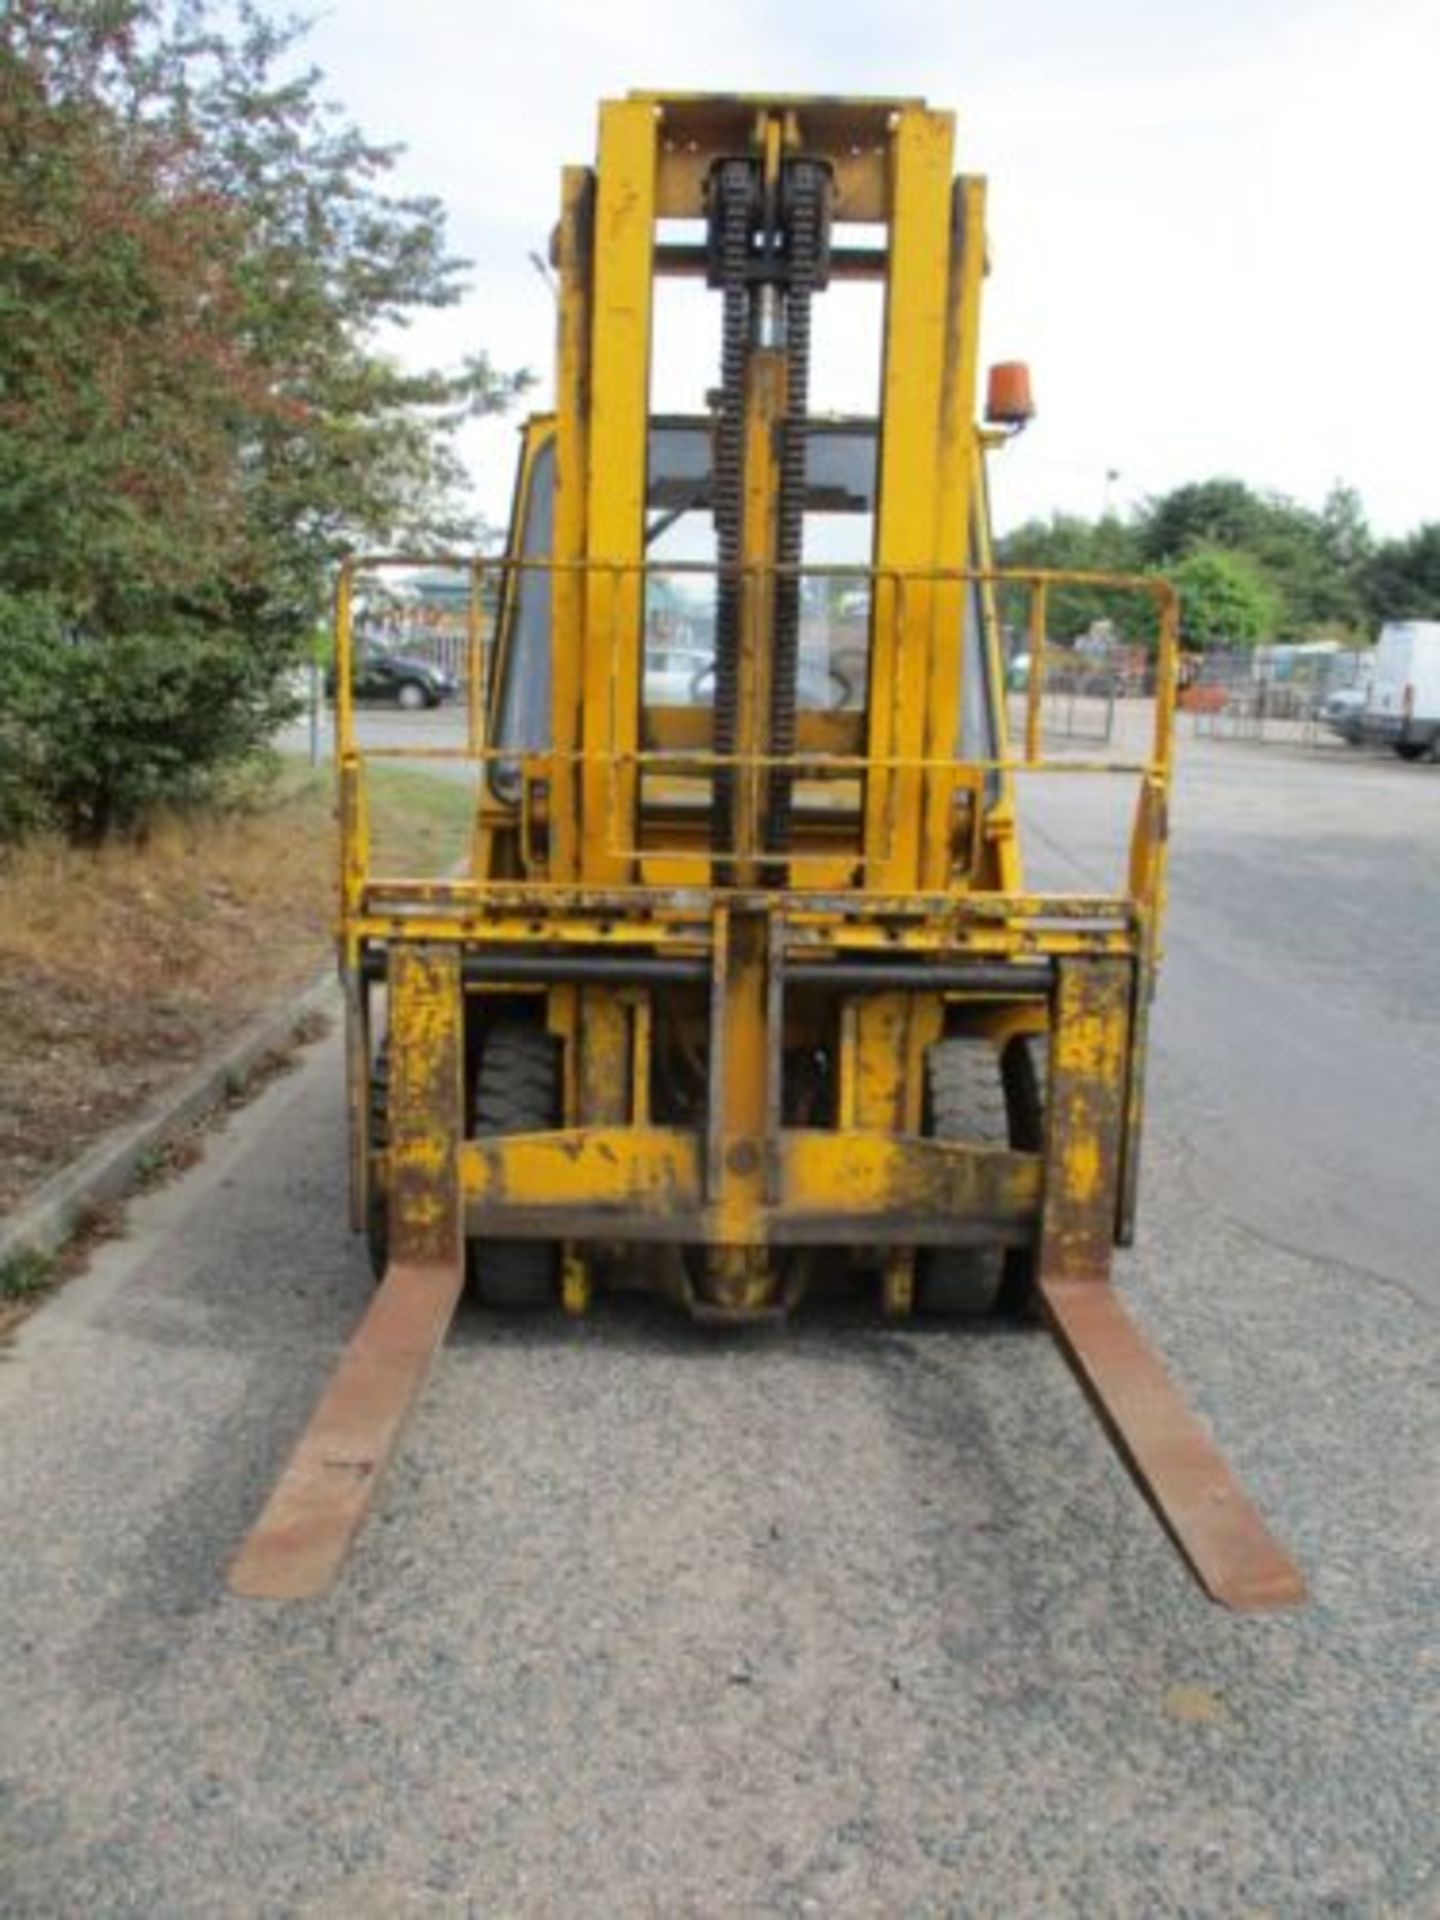 CLIMAX DA50 FORK LIFT FORKLIFT TRUCK STACKER 5 TON LIFT 6 7 8 10 DELIVERY